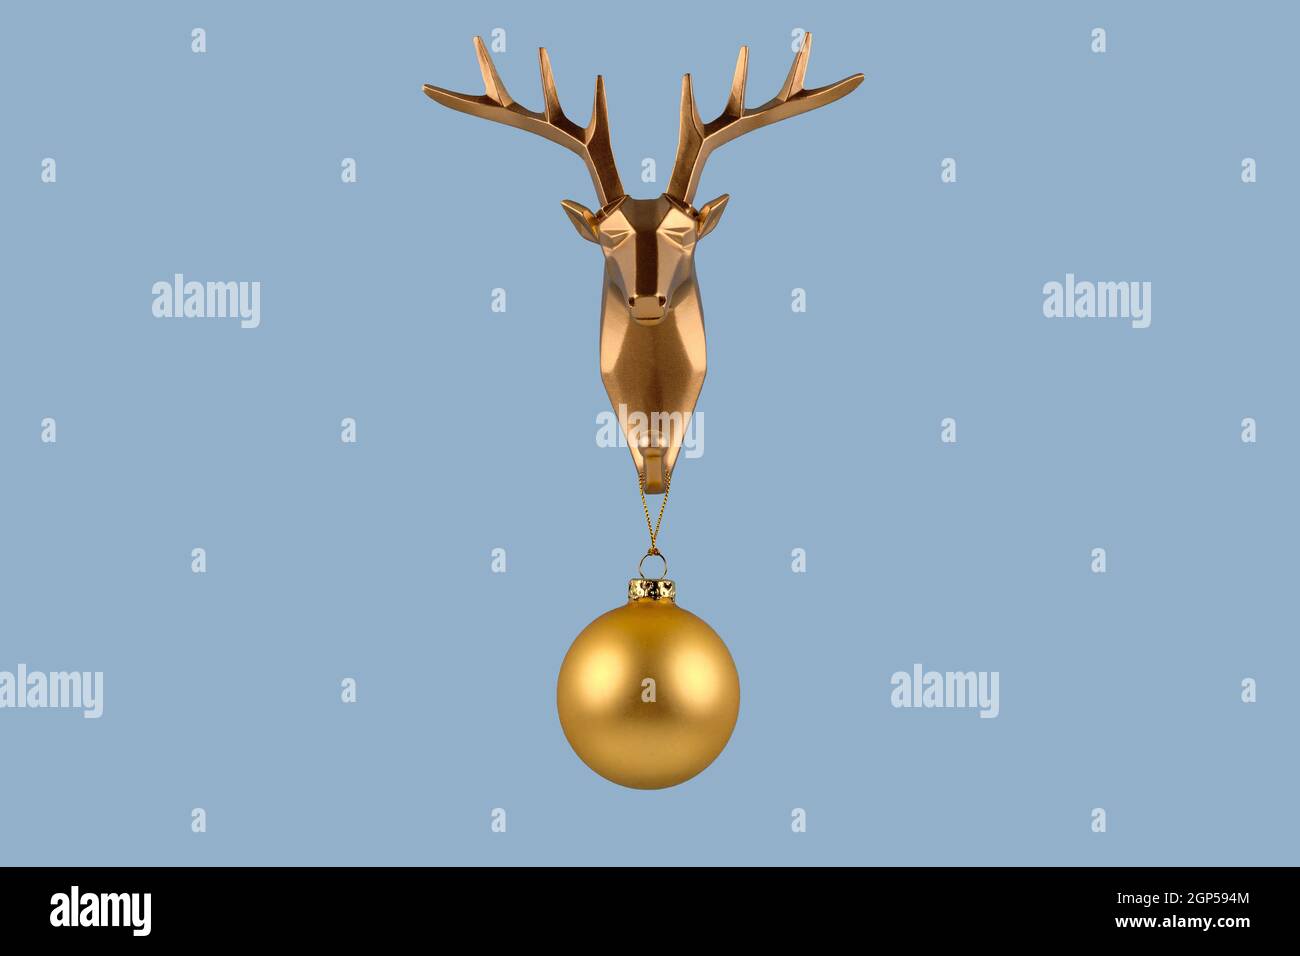 Creative Merry Christmas and New Year concept. Golden deer head with Christmas ball on blue background. Minimal design with copy space. Greeting card. Stock Photo